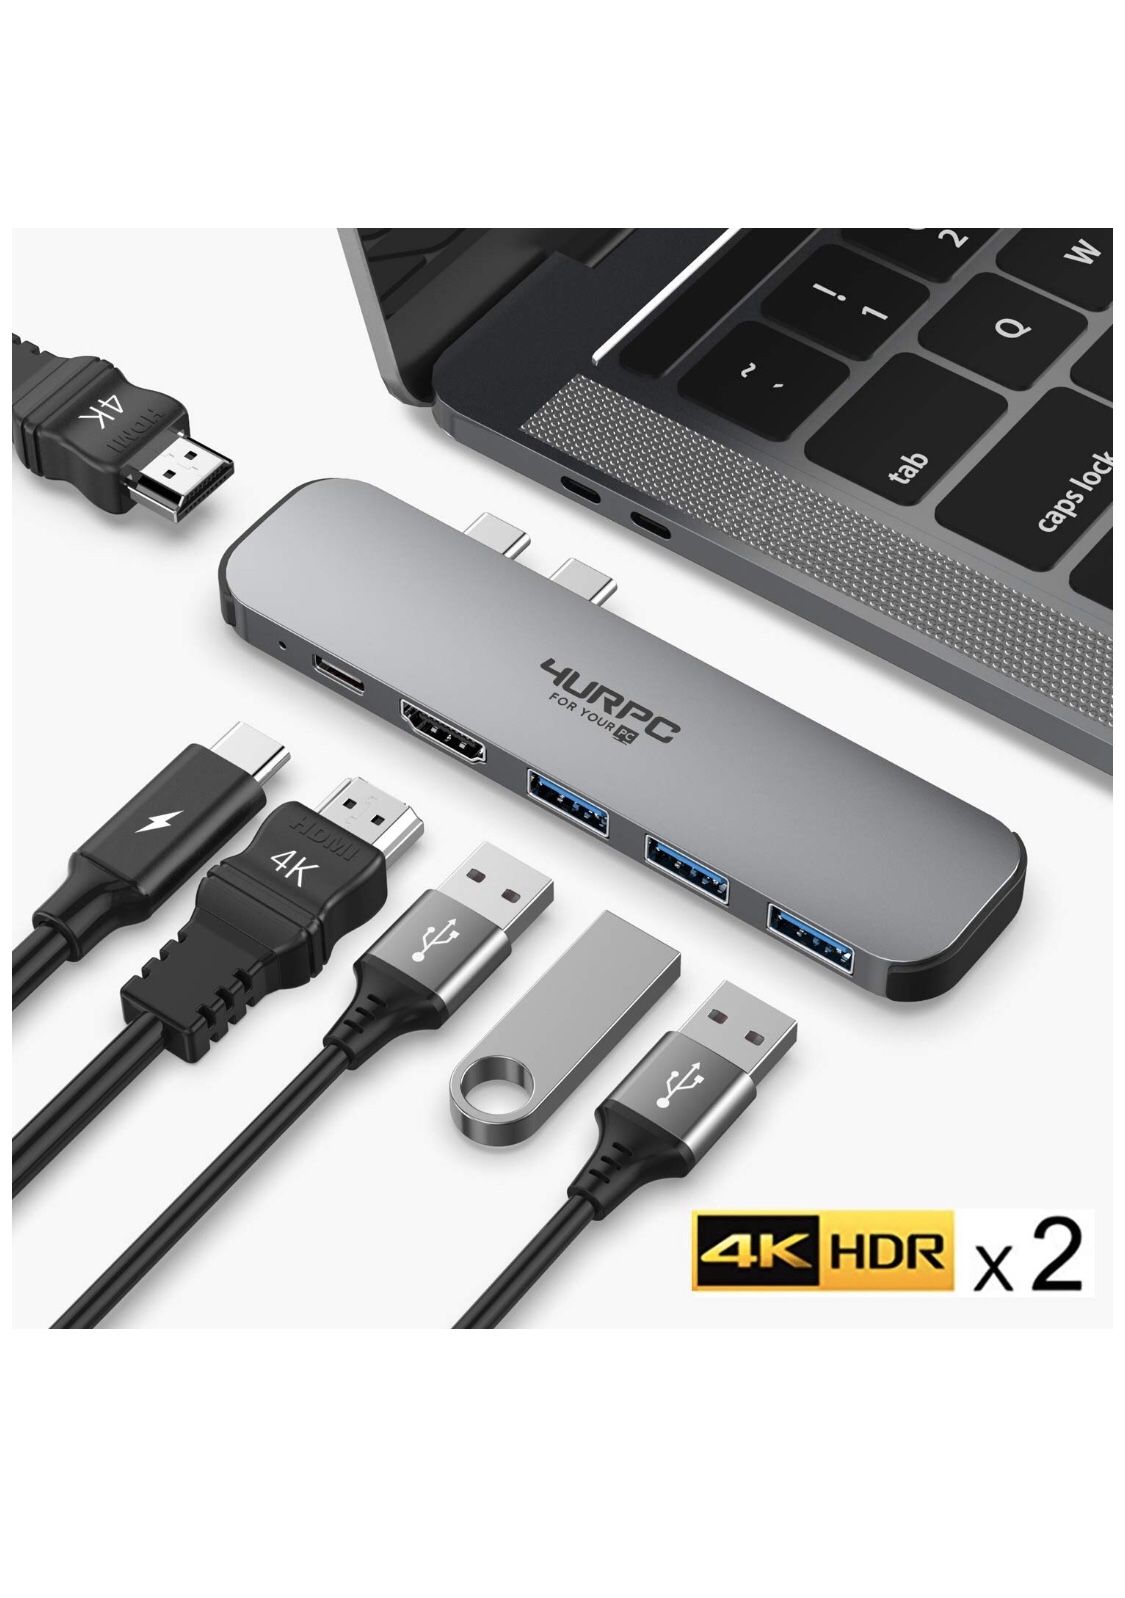 USB C Hub, 4K Dual Monitor Adapter USB Type C Docking Station Compatible for MacBook Pro 2019/2018/2017/2016, MacBook Air 2018/2019 with 2 4K HDMI, 3